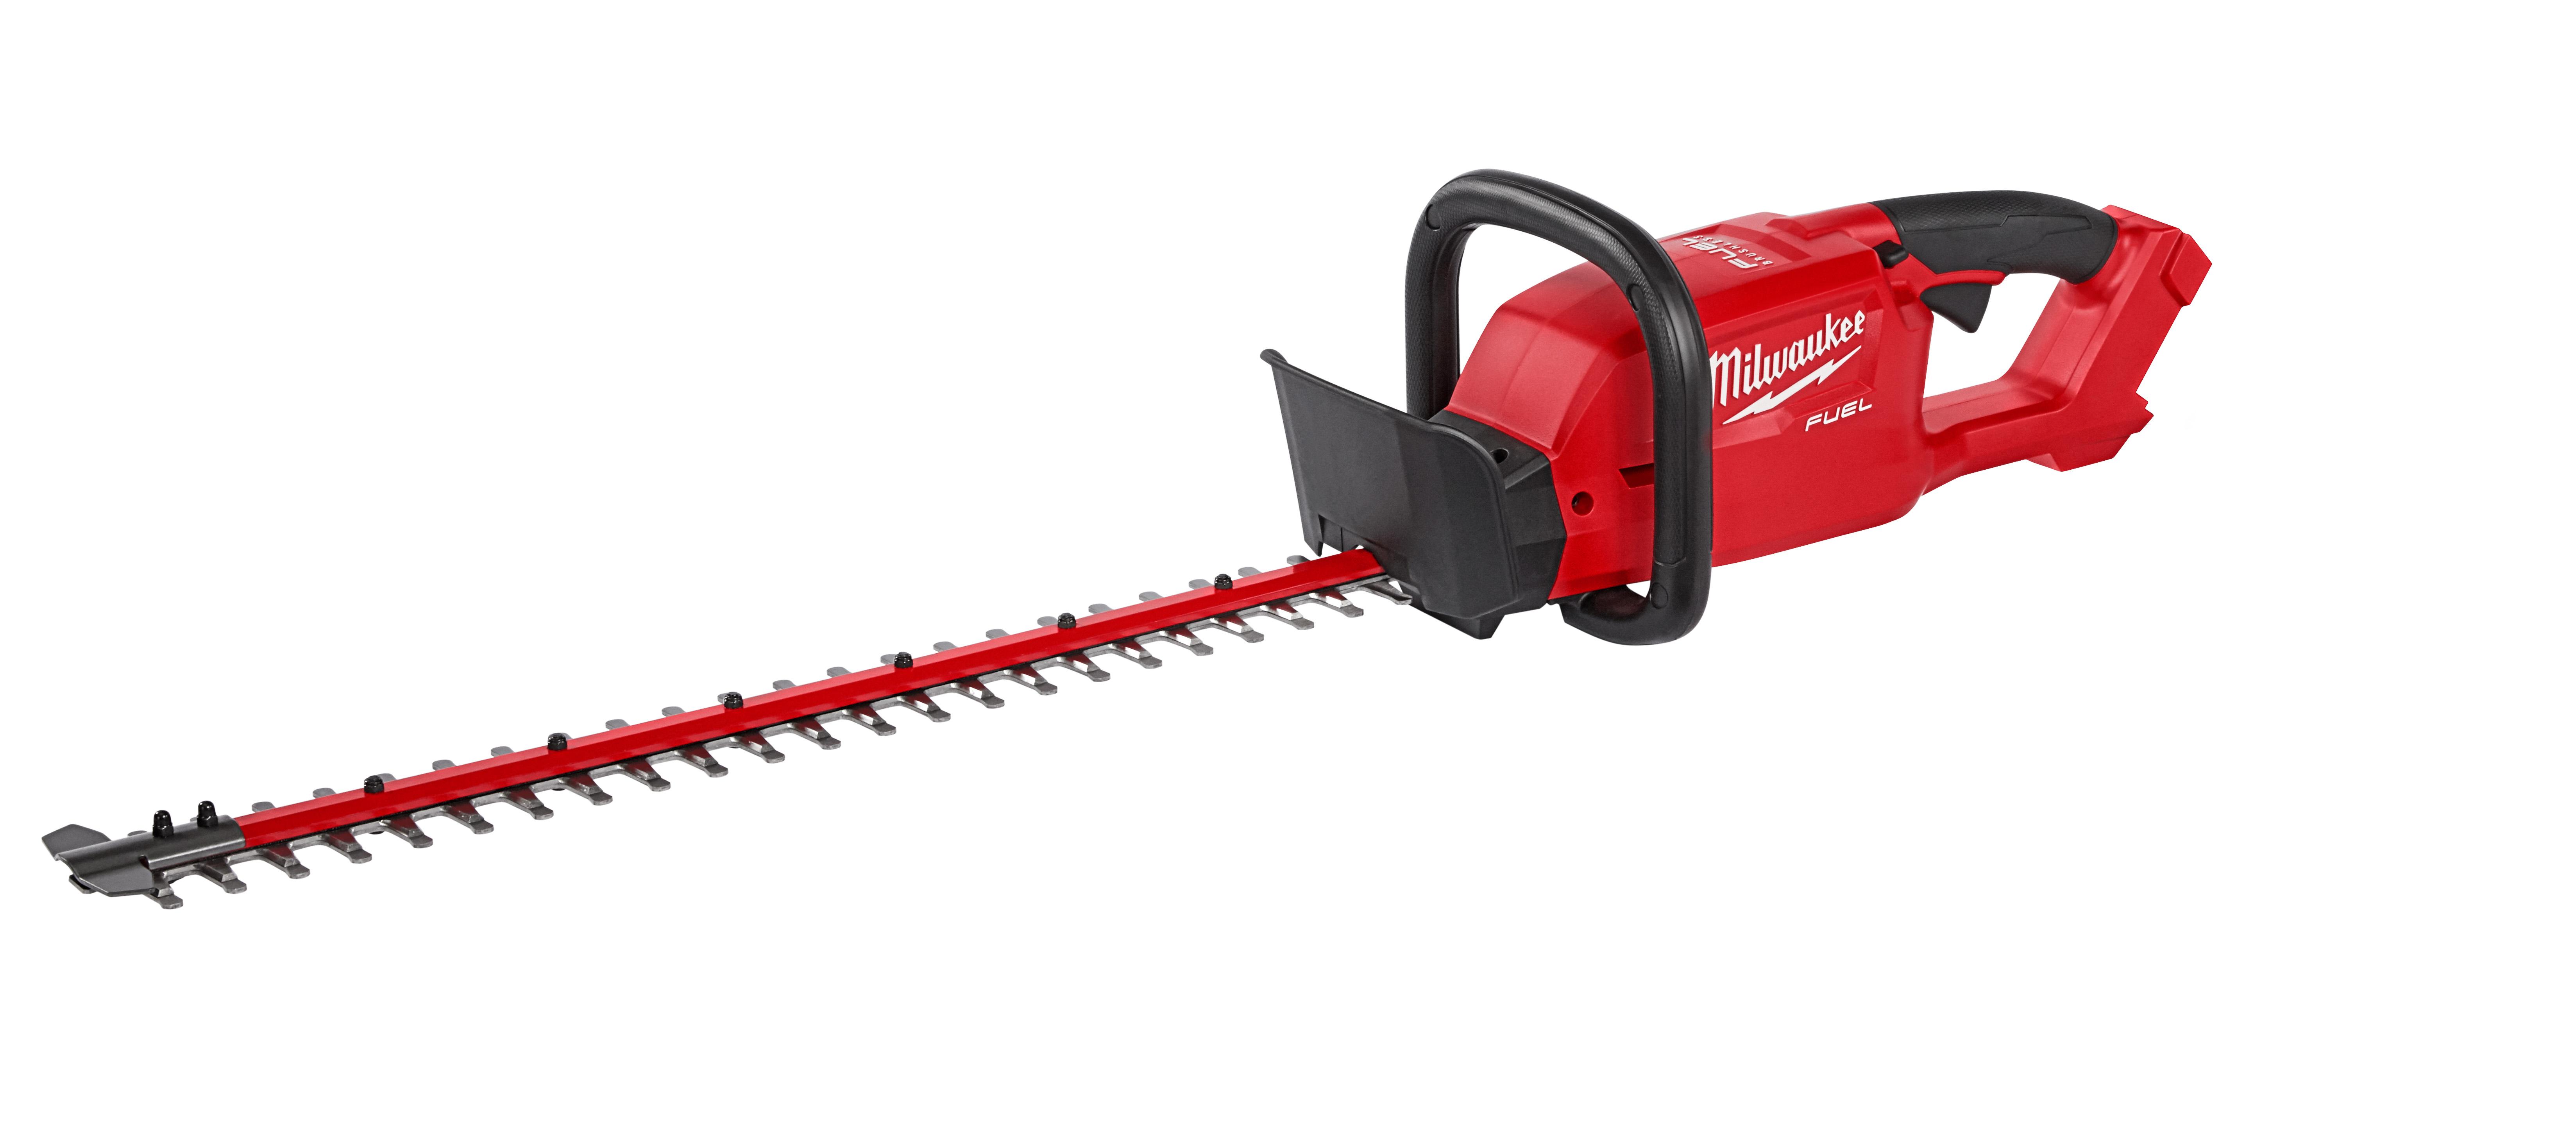 Milwaukee® M18™ 2636-20 Double Cut Bare Tool Cordless Shear, 14 ga Steel, 16 ga Stainless Steel Cutting, 2300 spm, 15.2 in OAL, Lithium-Ion Battery